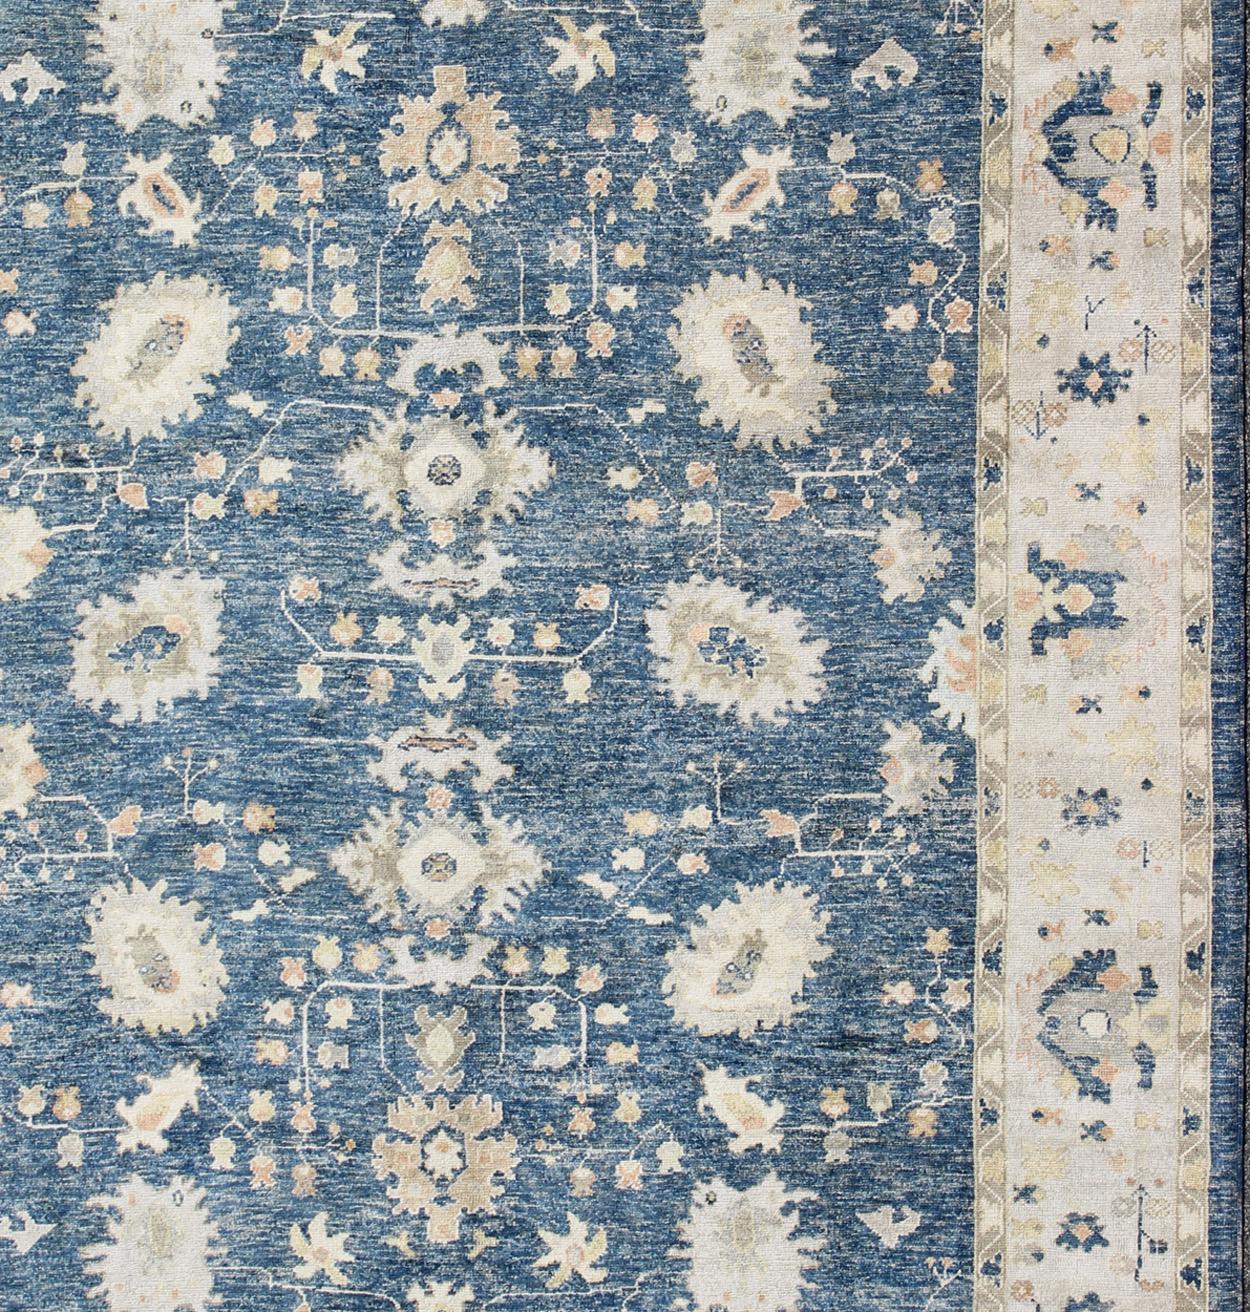 Turkish Oushak Rug in Blue Background, Neutral Colors and All-Over Design In New Condition For Sale In Atlanta, GA